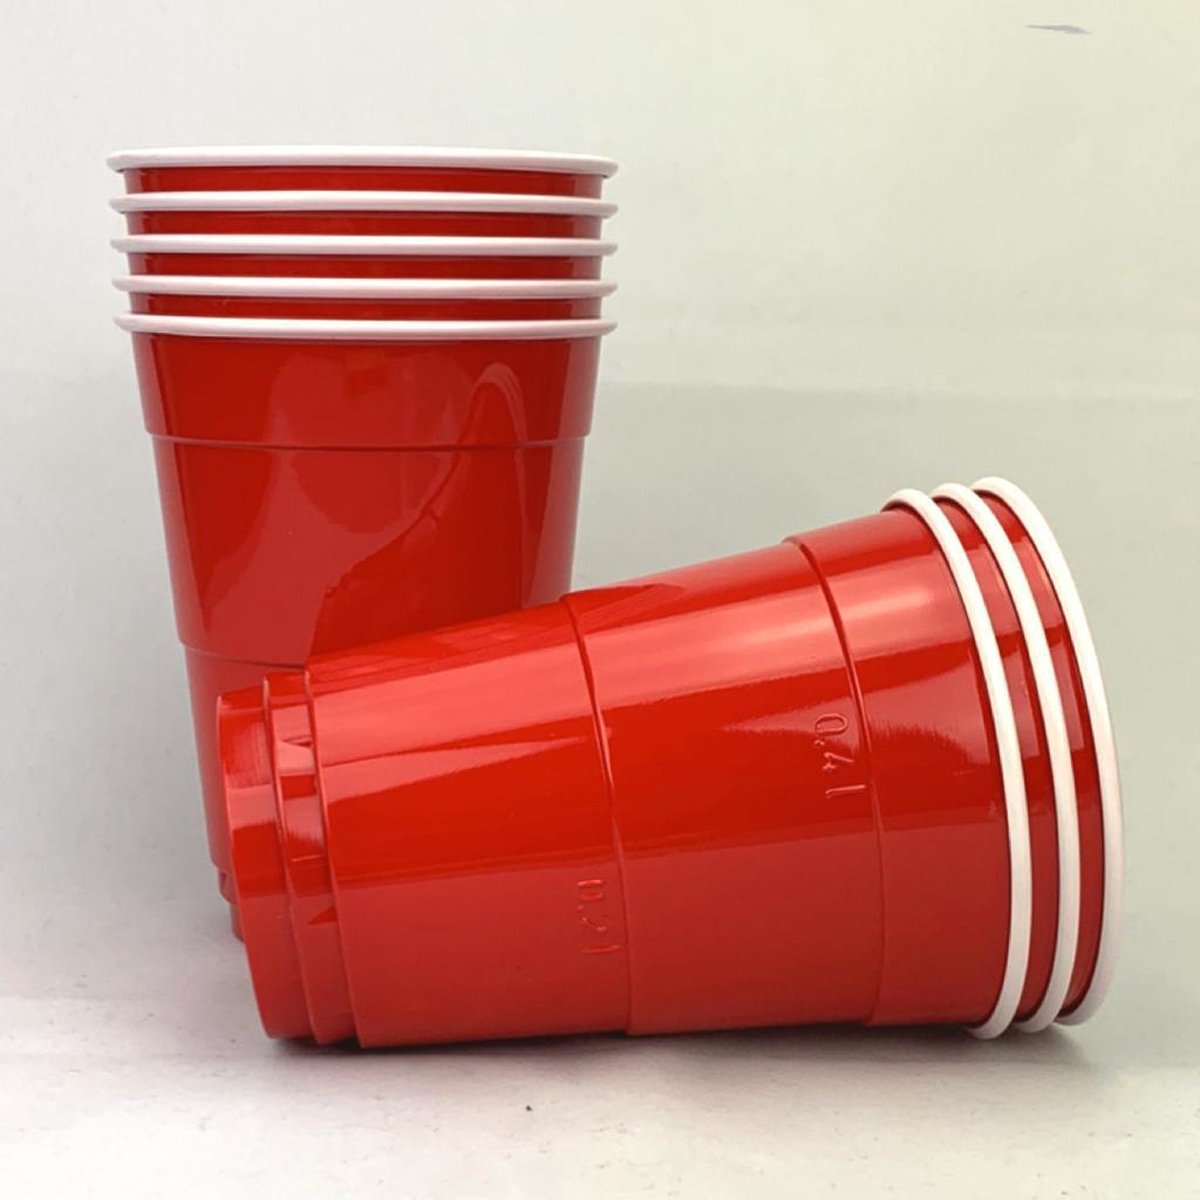 Huhtamaki Duurzame Red Party Cups - 50 Stuks - Party Bekers - Red Cups - Red Party Cups - American Cups - Rood - Beerpong Bekers 400 ml